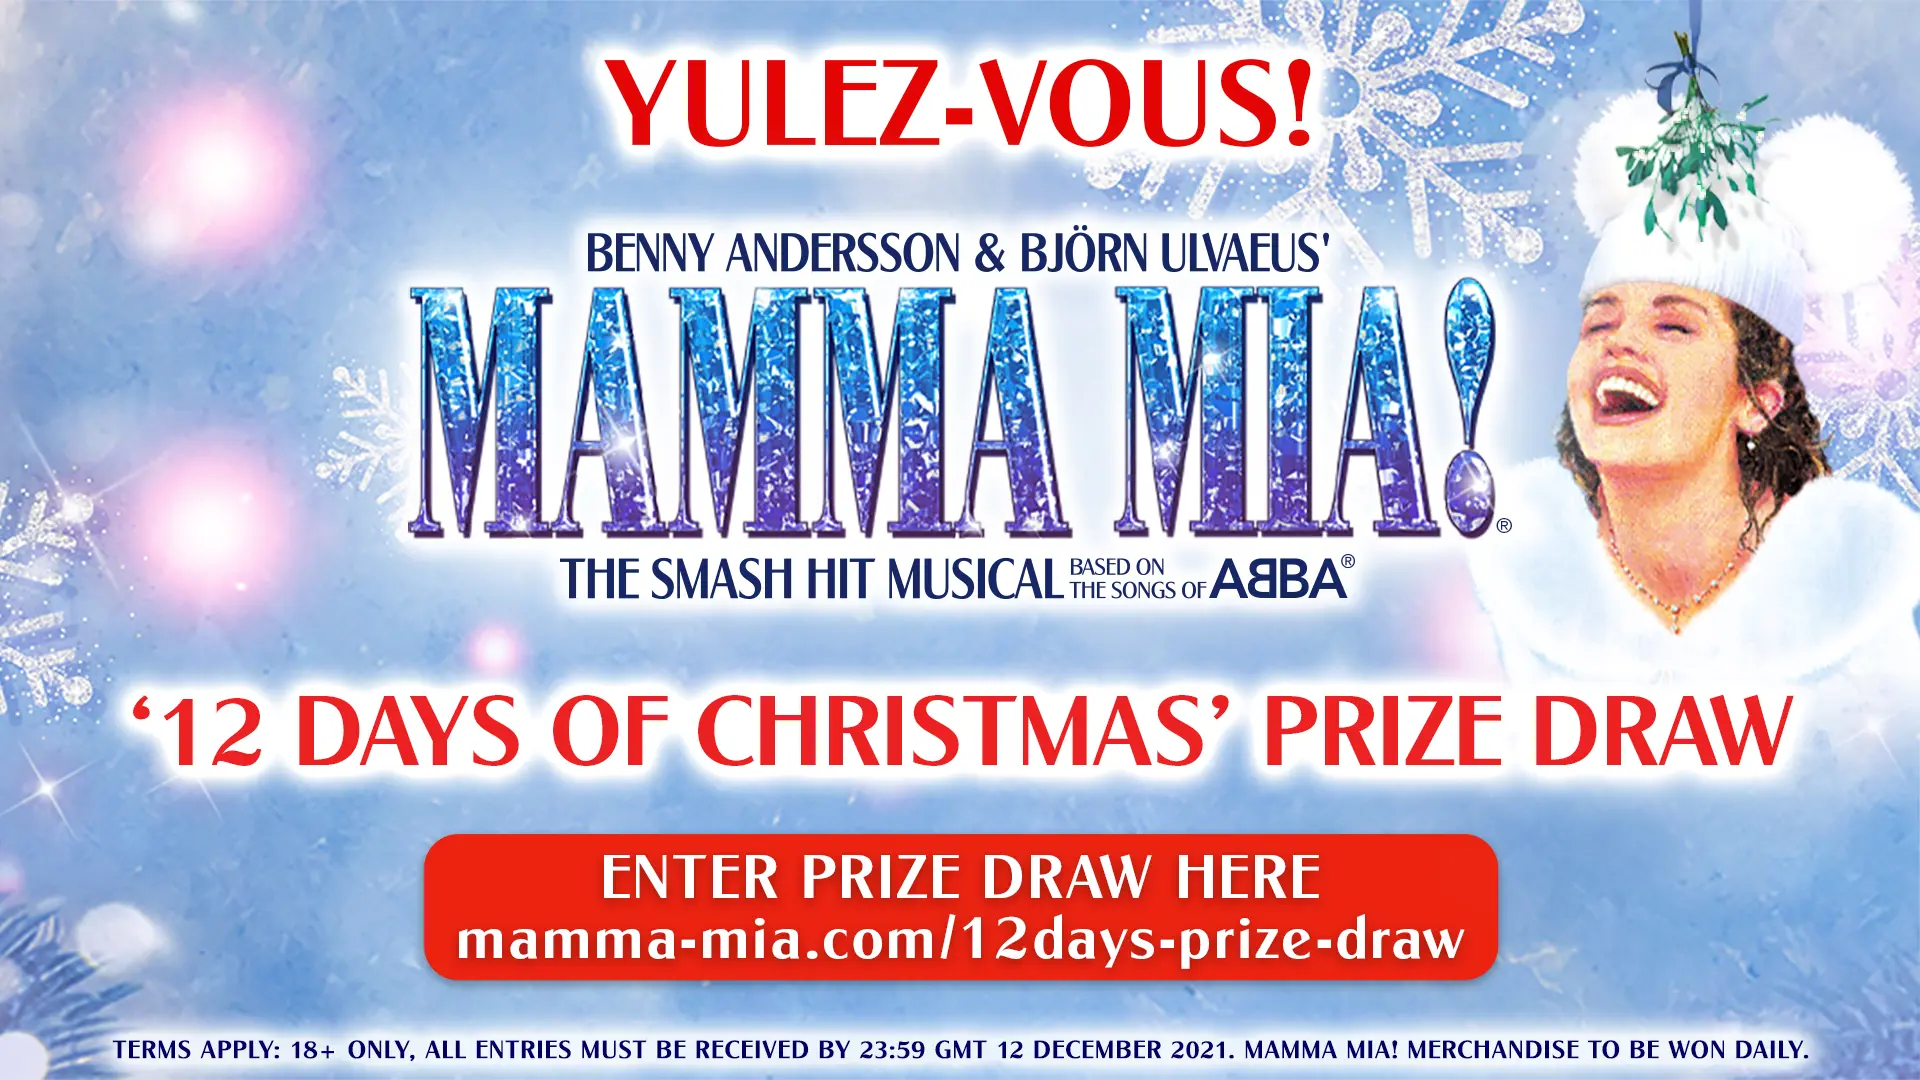 The MAMMA MIA! '12 Days Of Christmas' Prize Draw is CLOSED!